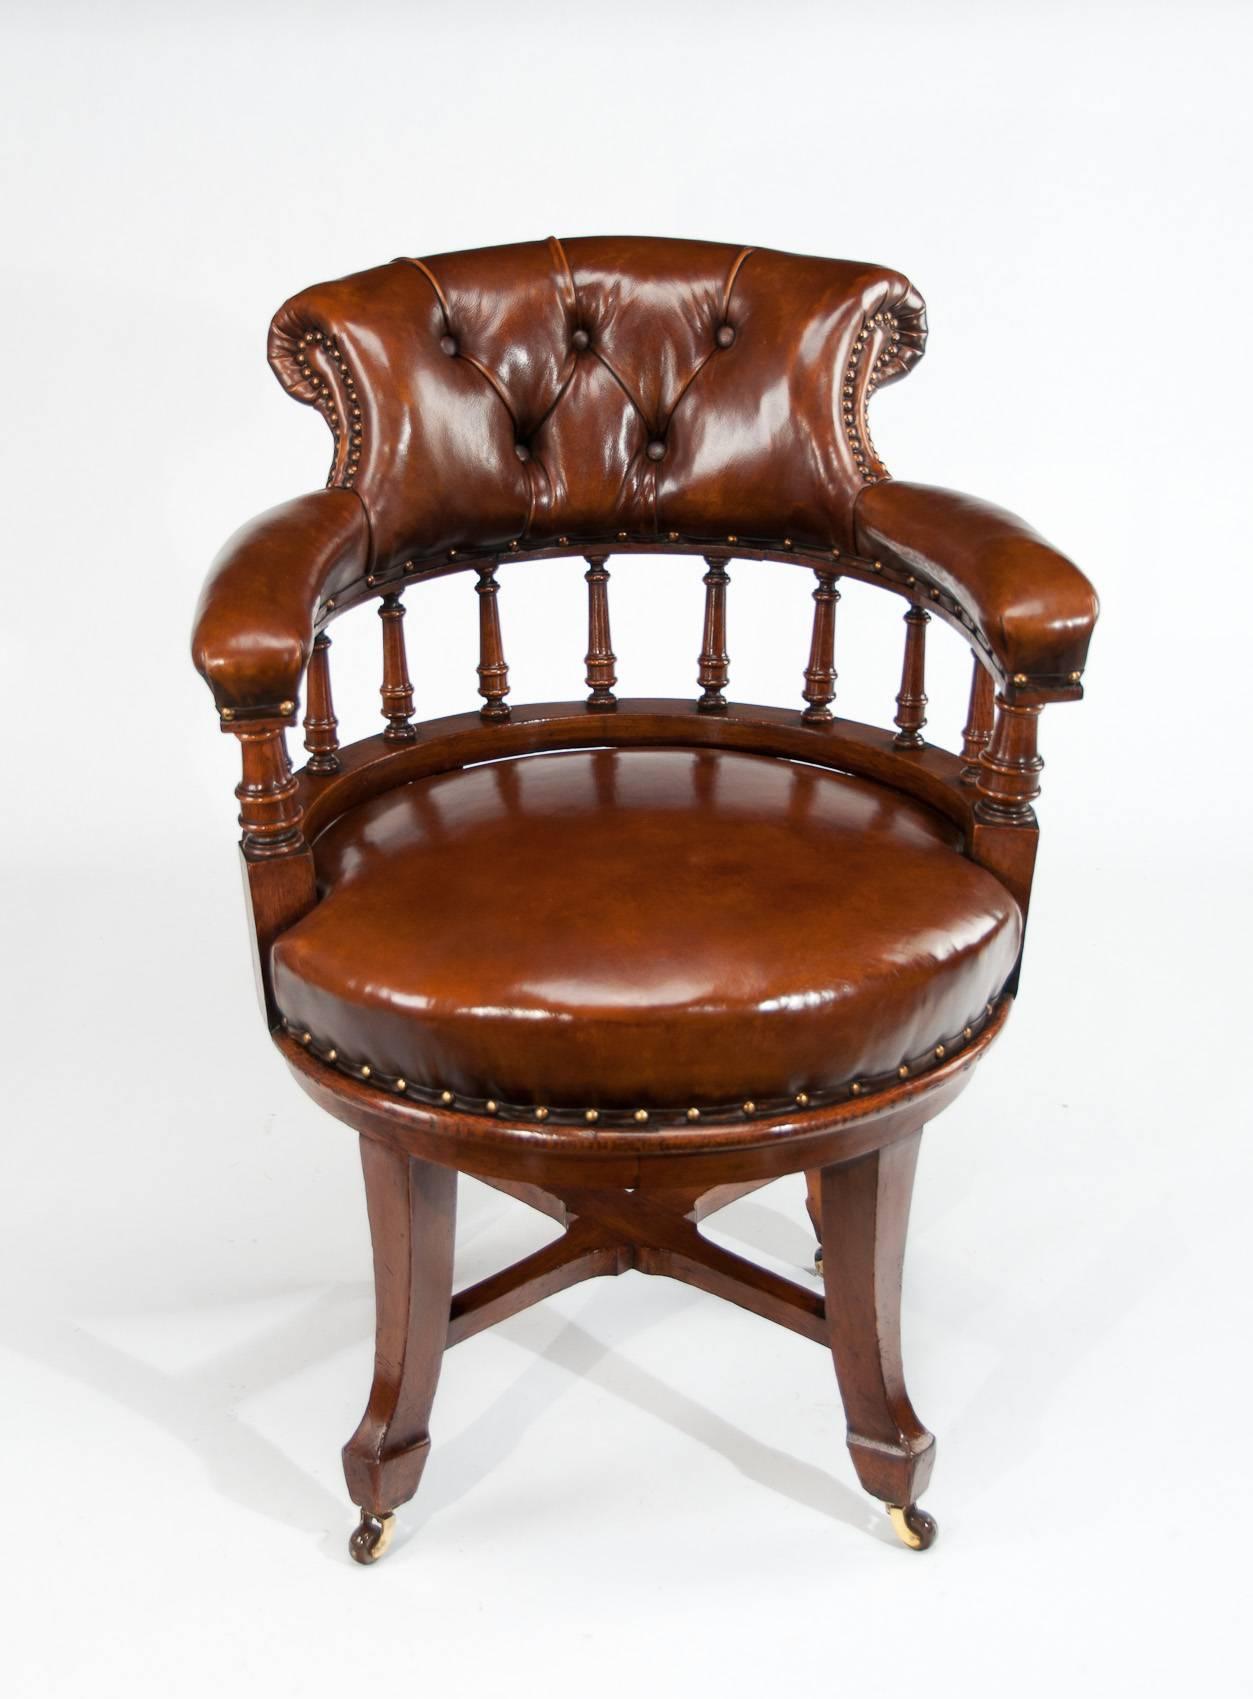 19th Century Quality Victorian Oak Leathered Revolving Desk Chair by S & H Jewell